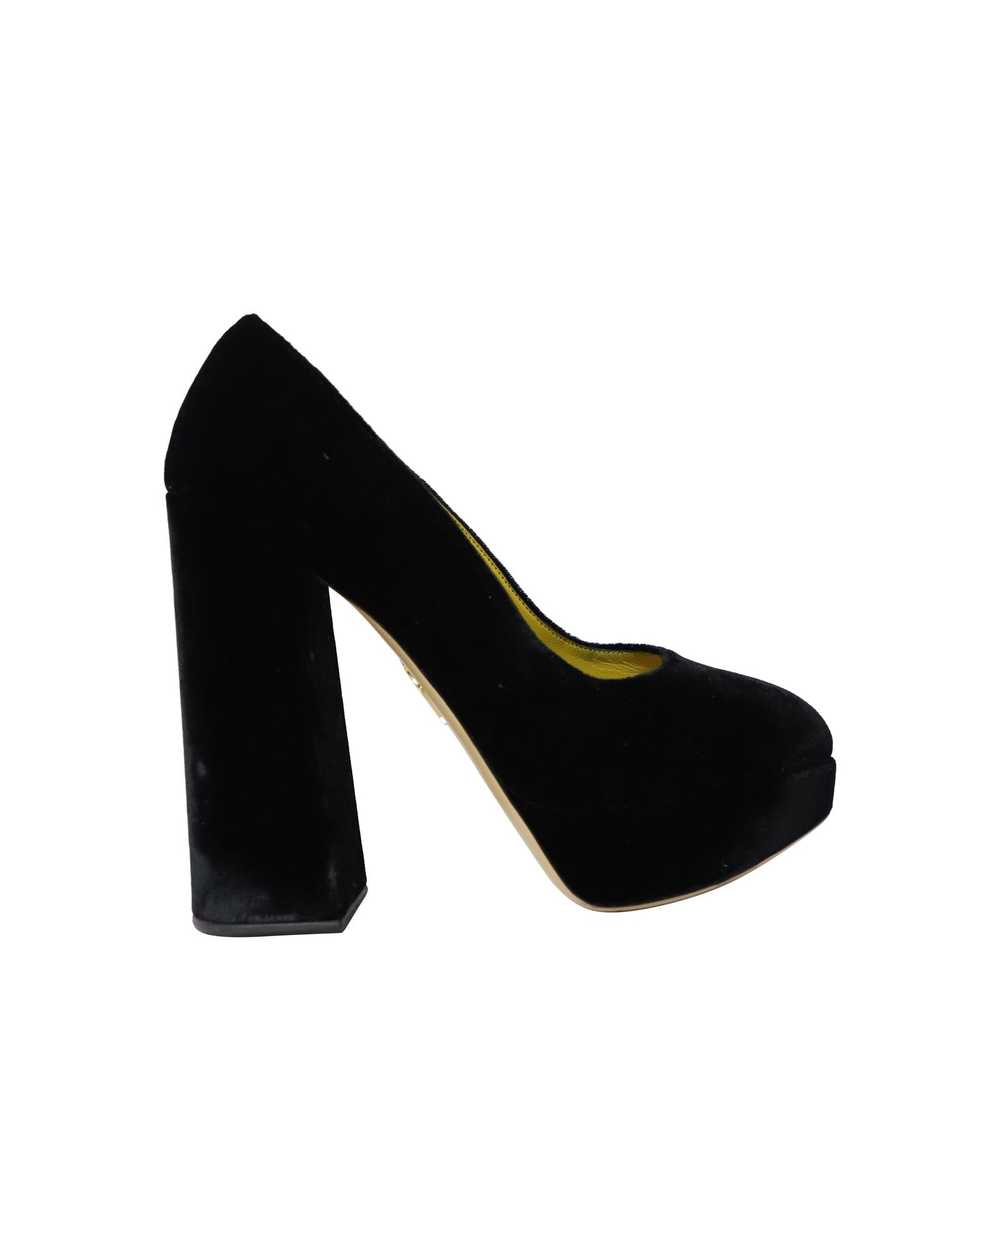 Product Details Chunky Pumps - image 7